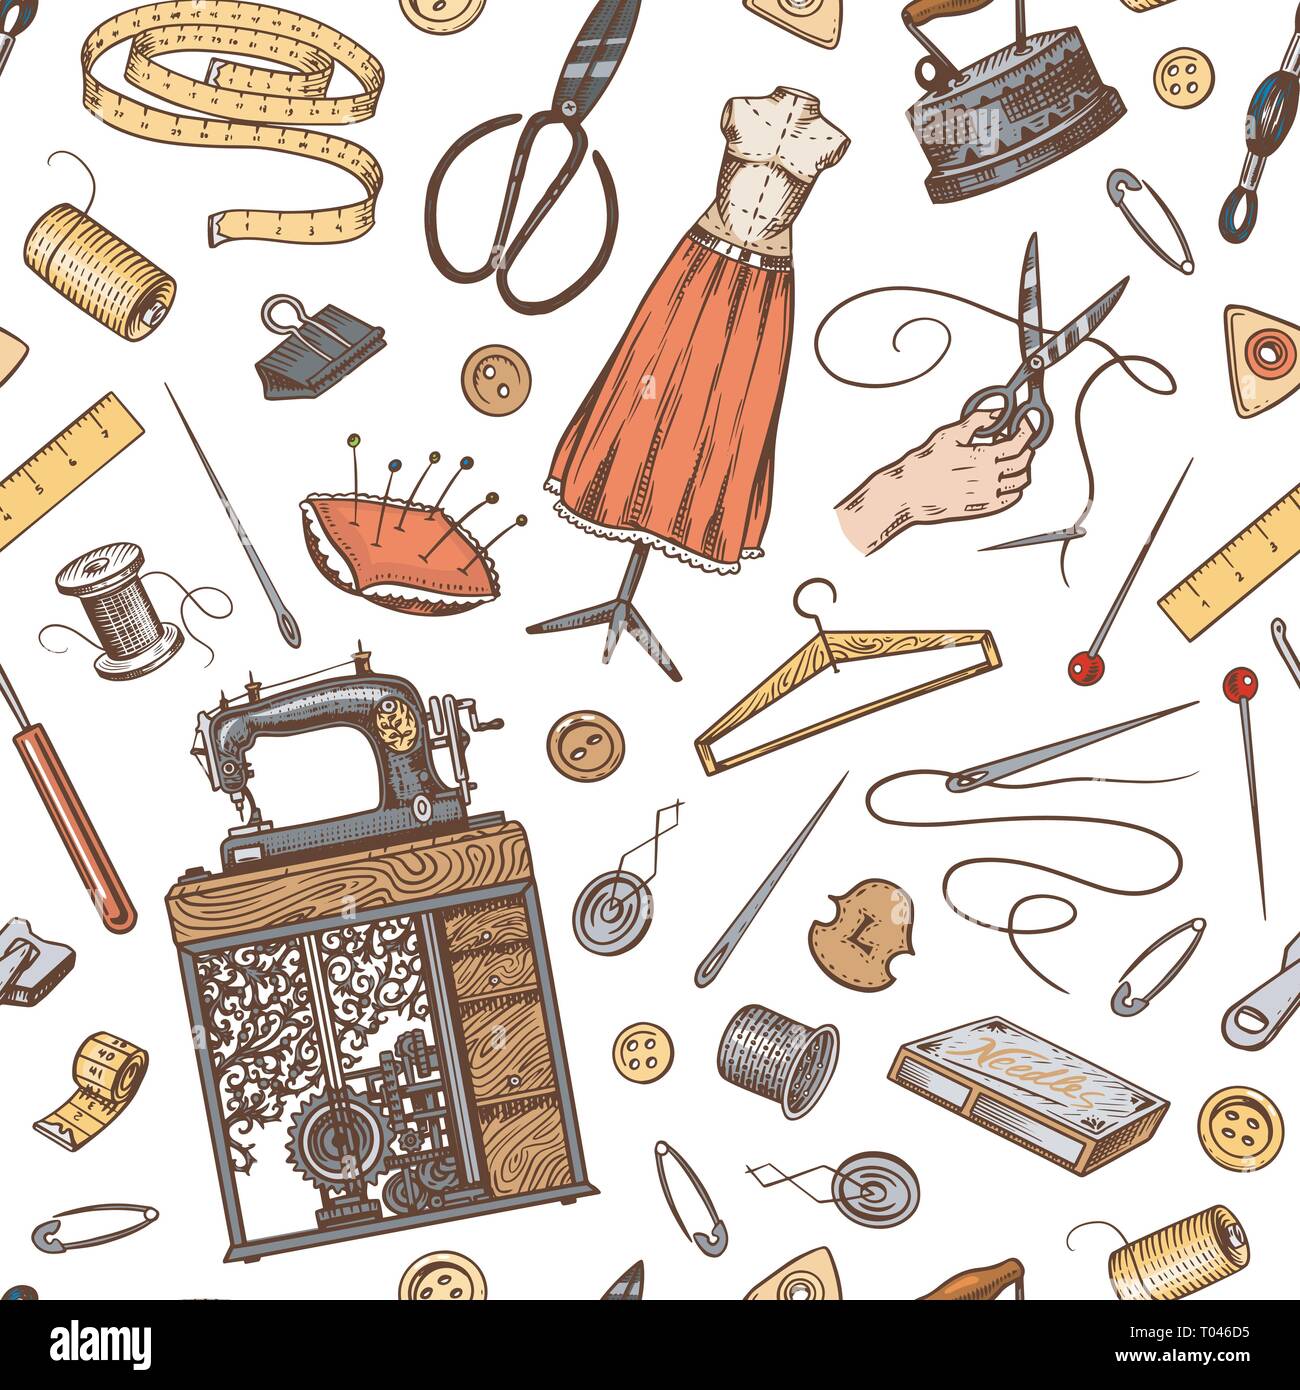 https://c8.alamy.com/comp/T046D5/sewing-seamless-pattern-tools-and-elements-or-materials-for-needlework-tailor-shop-for-badges-labels-thread-and-needle-mannequin-engraved-hand-T046D5.jpg